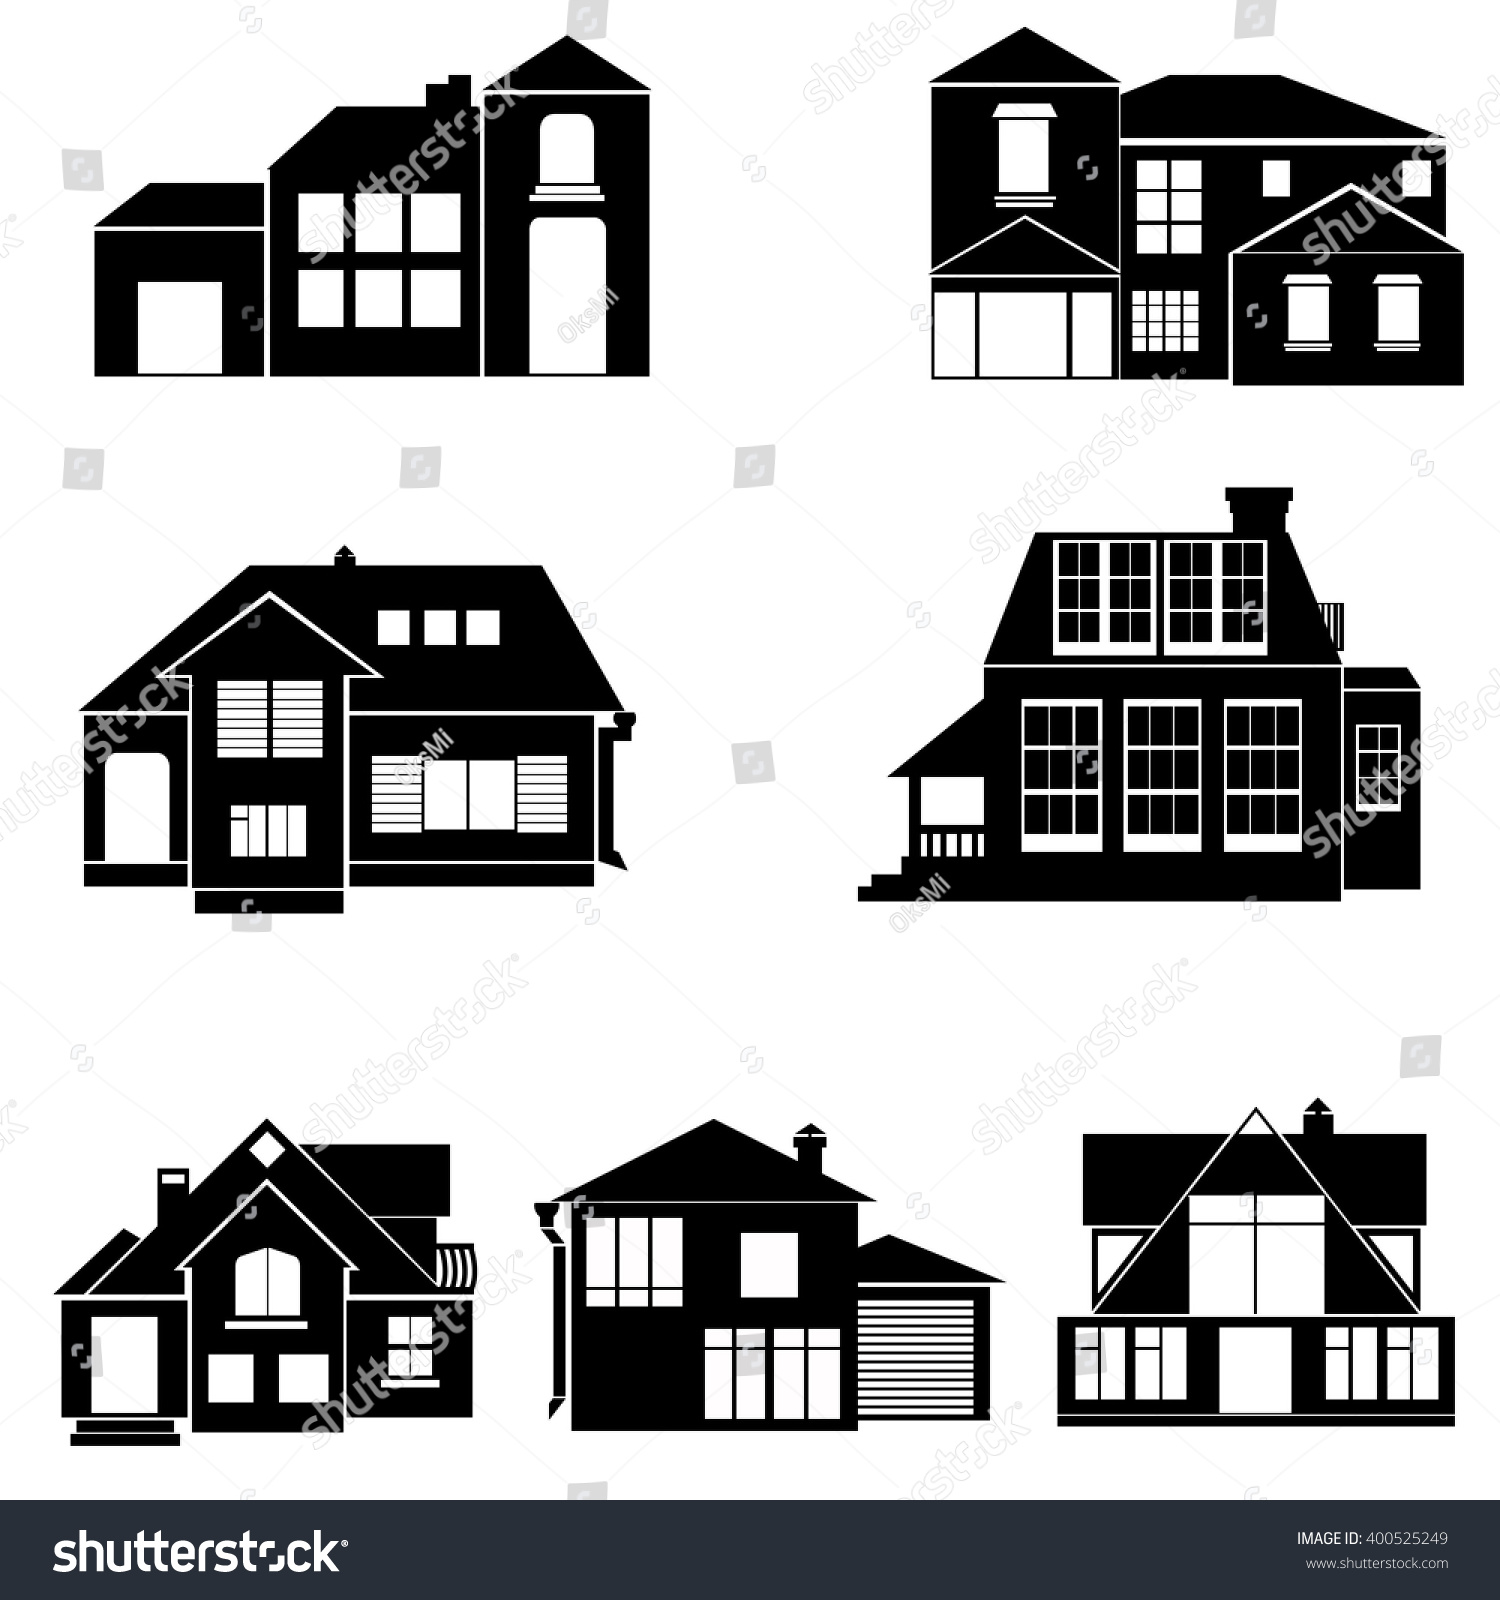 Black Isolated House Silhouette Stock Vector (Royalty Free) 400525249